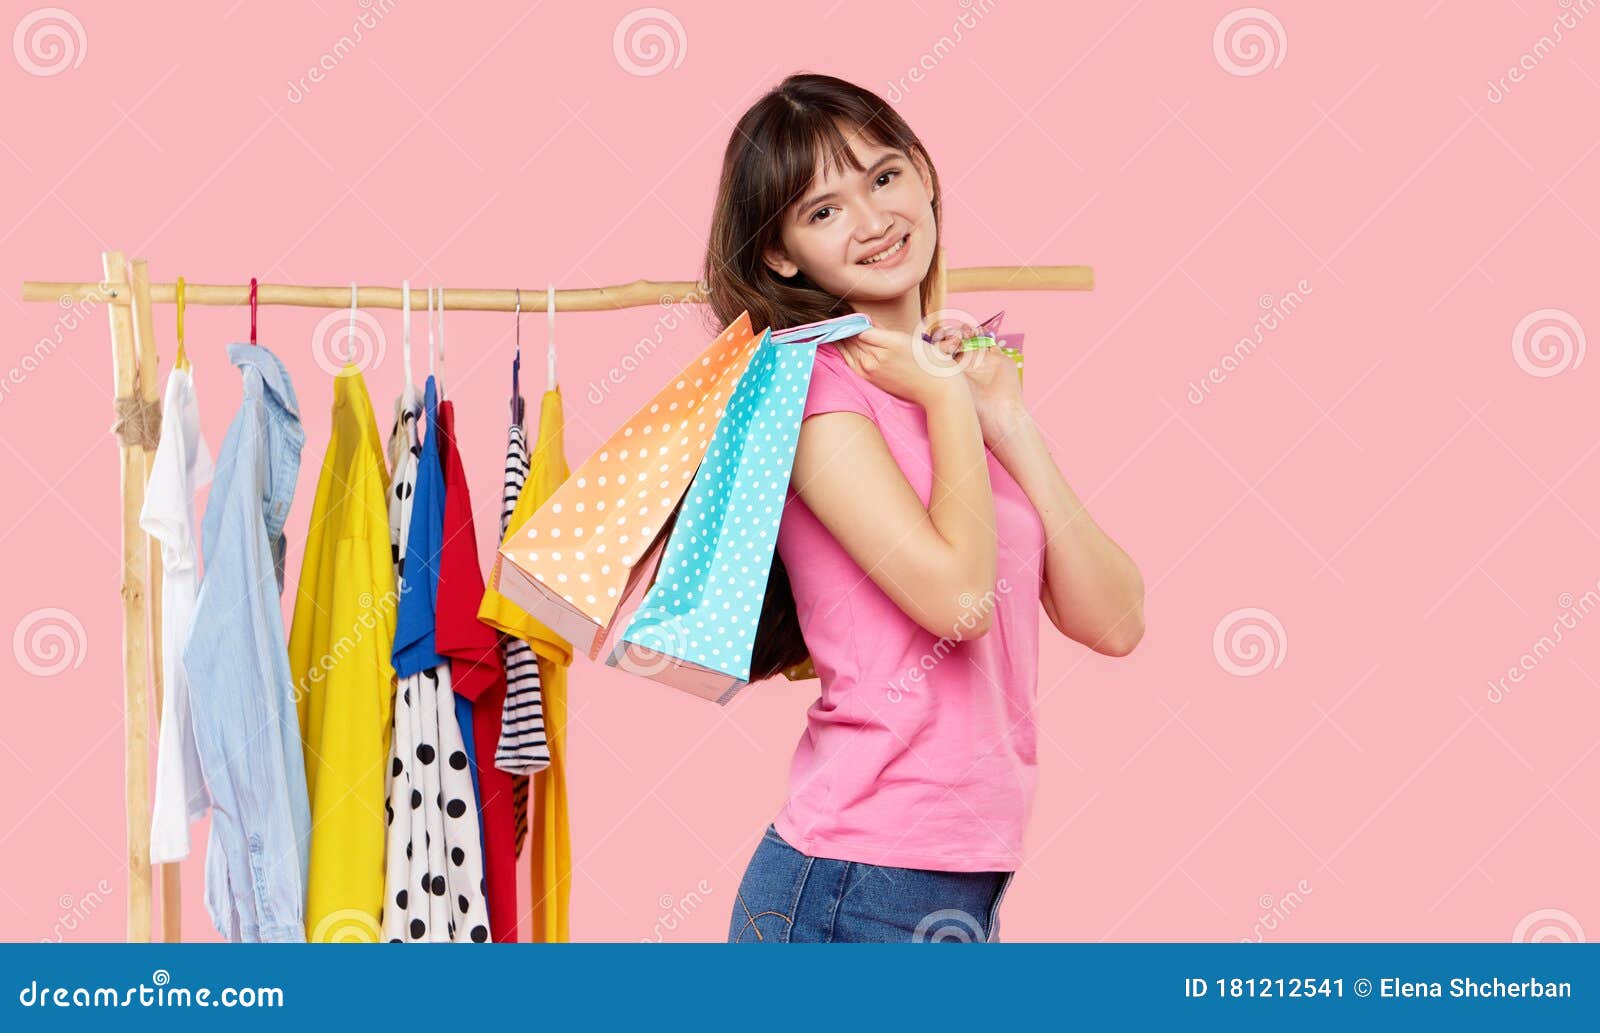 Online Shopping. Young Asian Woman With Shopping Bags Tries On Colorful ...